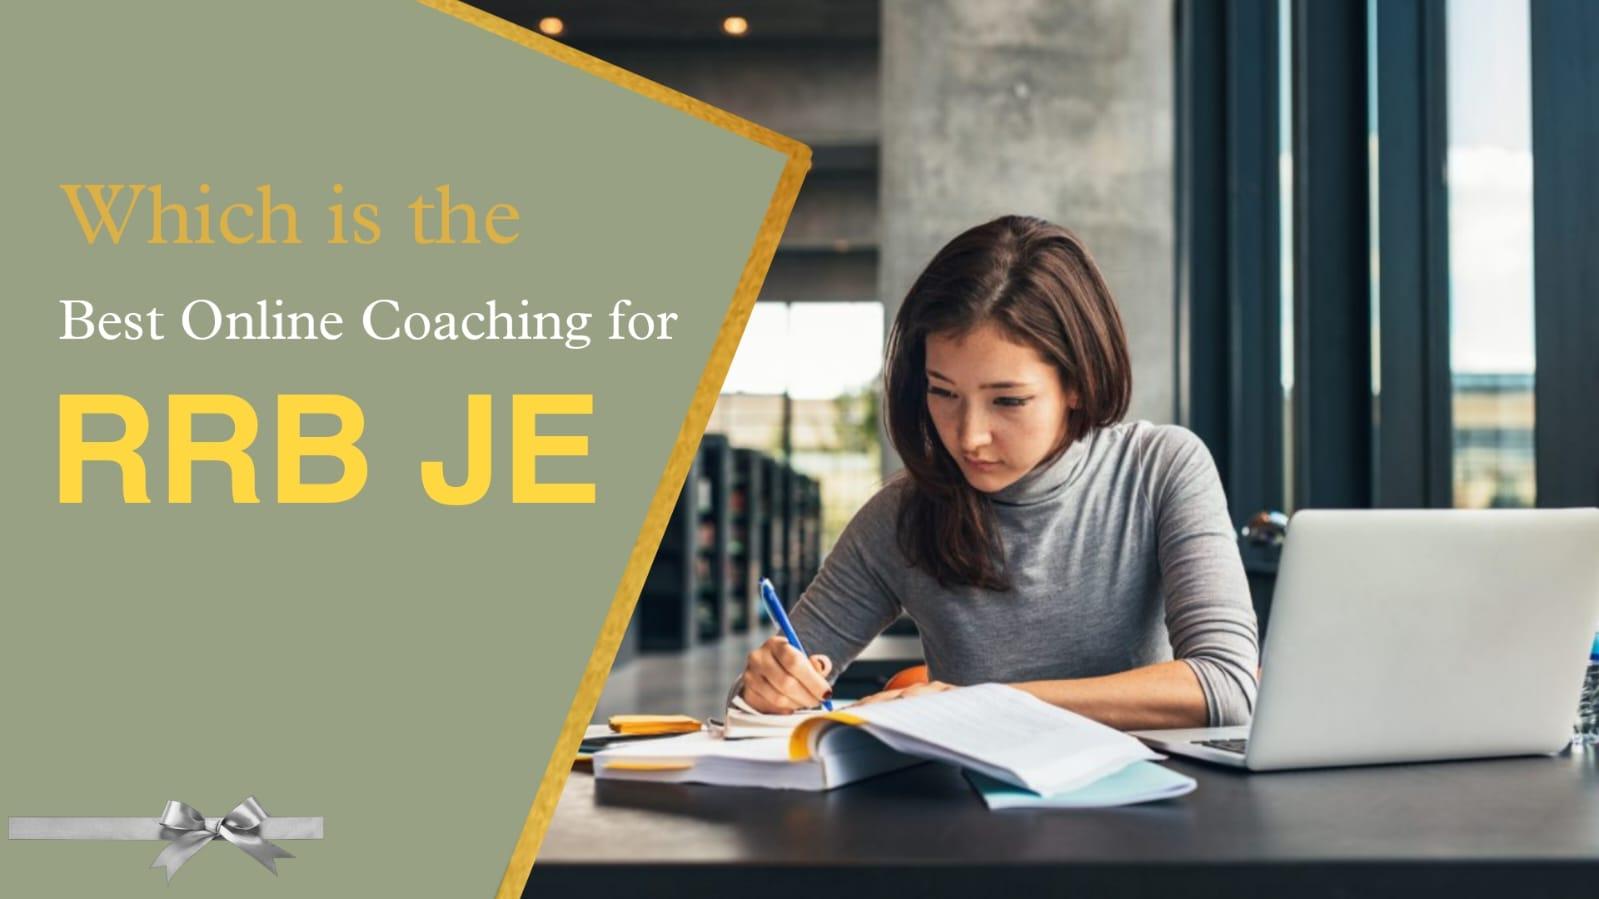 Which is the best online coaching for RRB JE